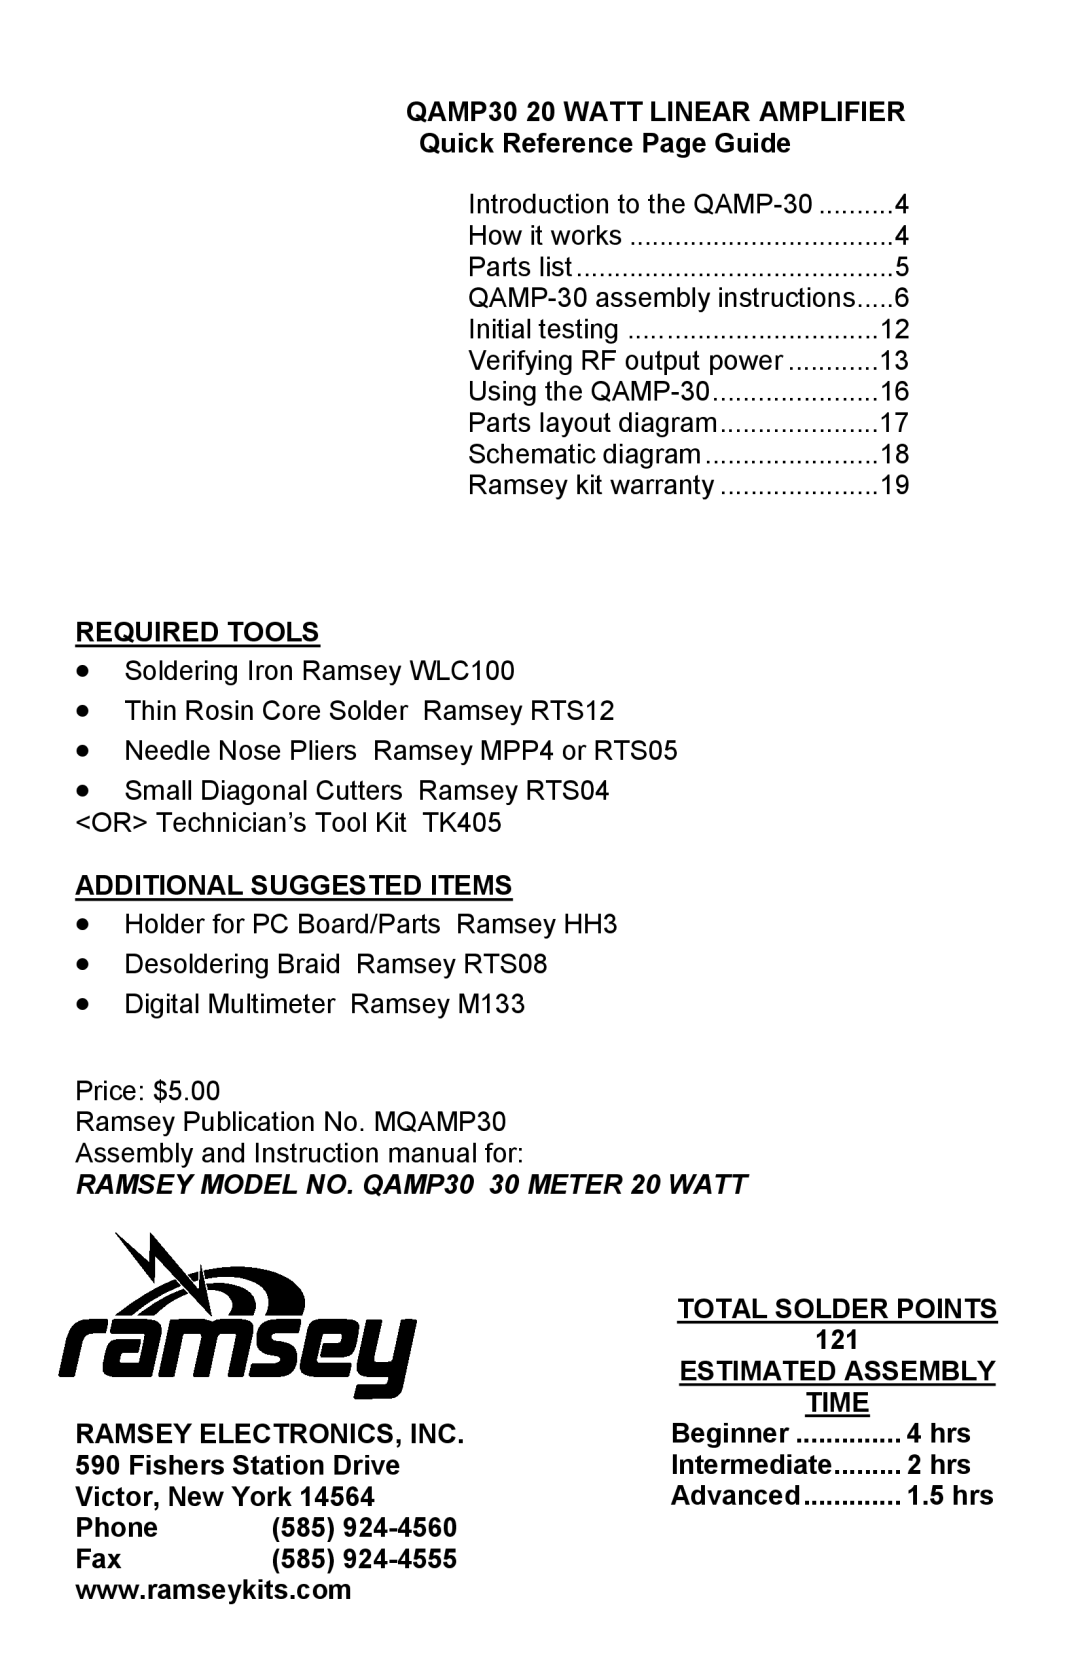 Ramsey Electronics QAMP30 20 WATT LINEAR AMPLIFIER, Quick Reference Page Guide, Required Tools, Total Solder Points 